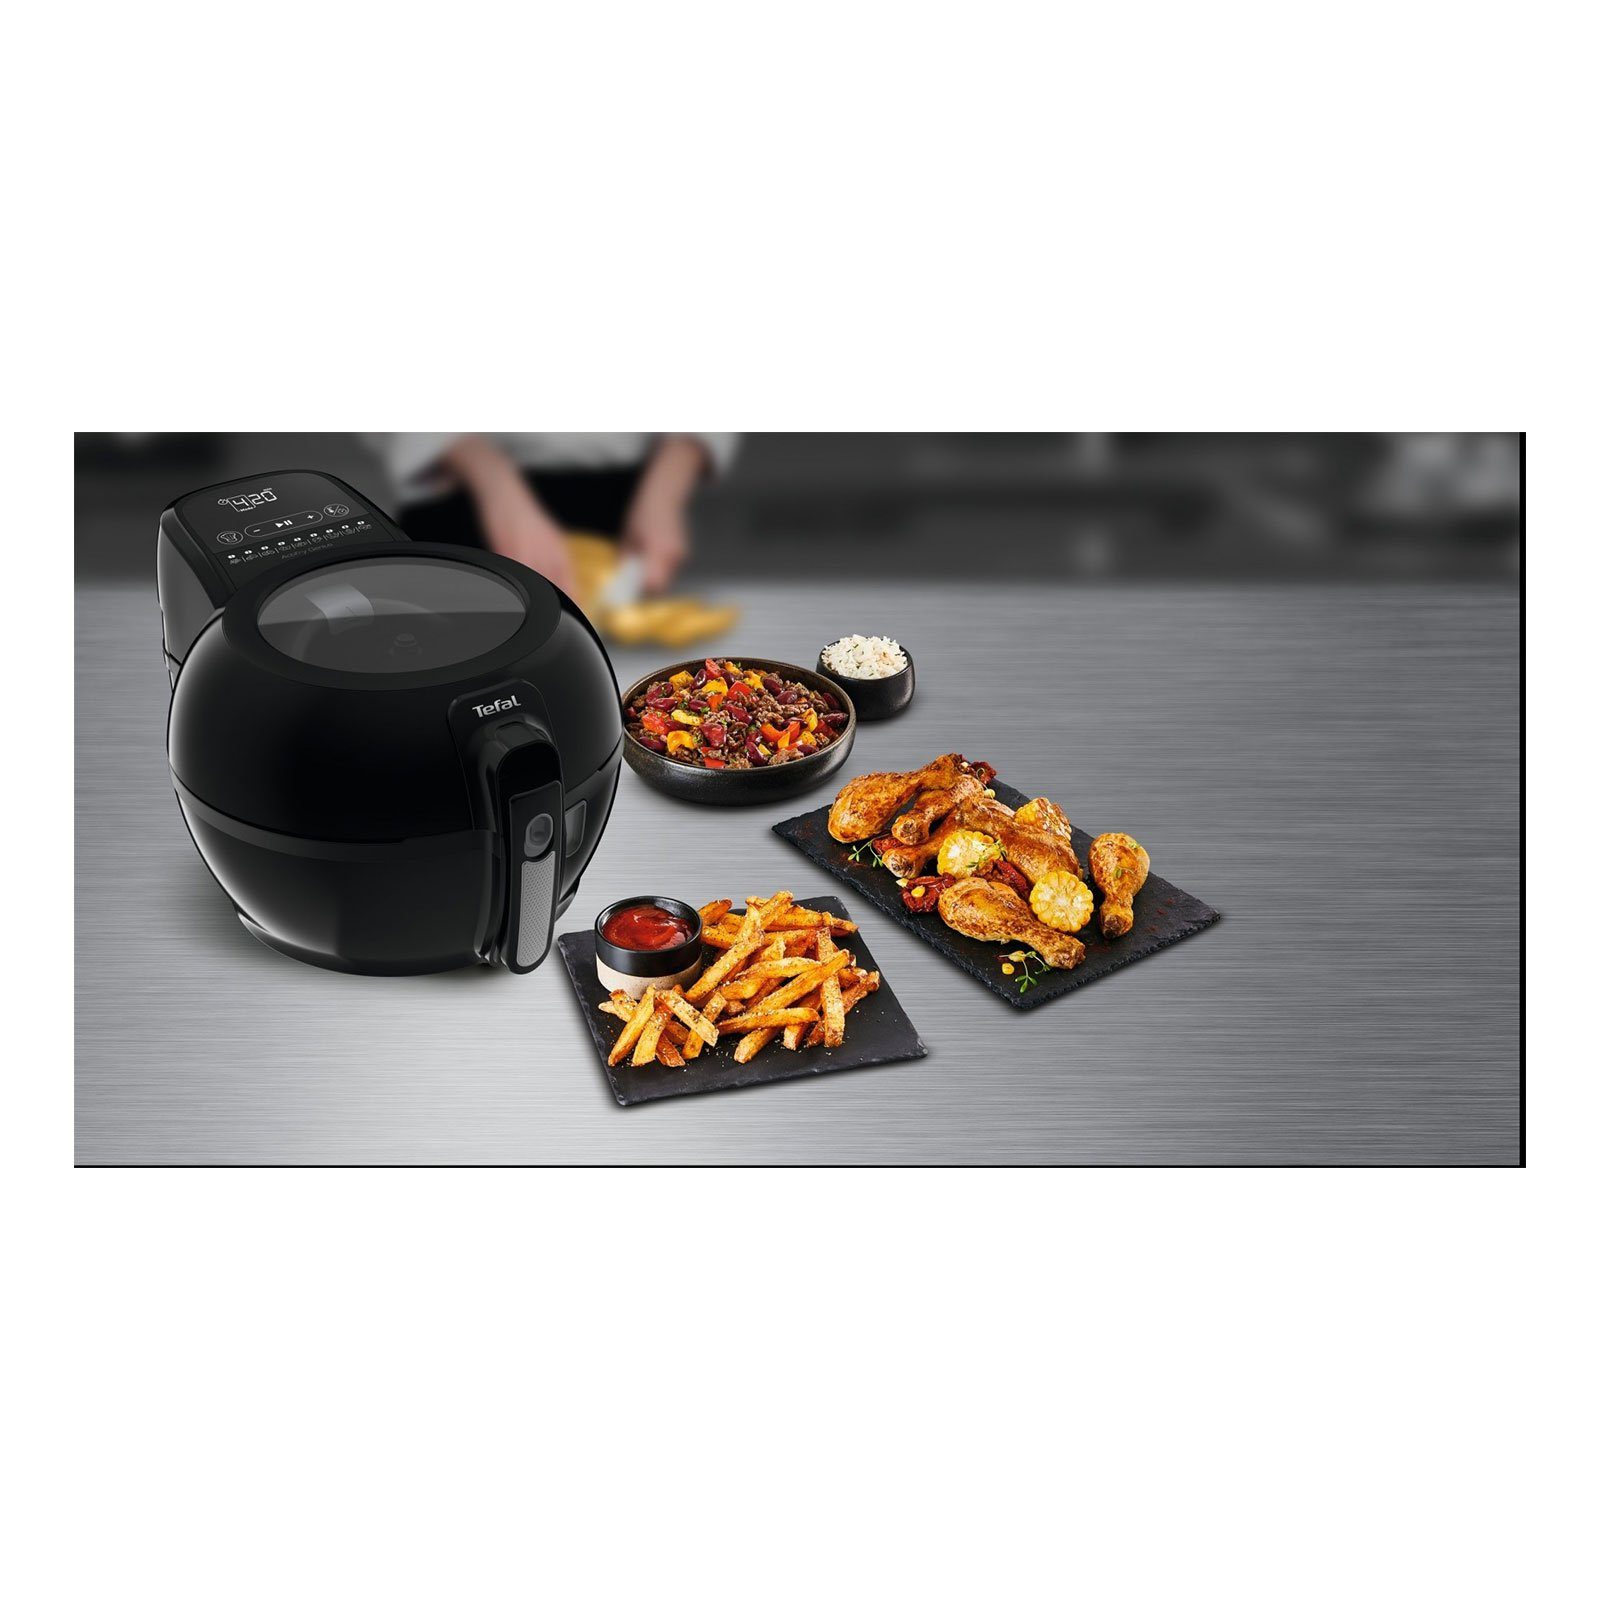 ActiFry FZ Tefal Smart W Heißluft-Fritteuse, 1550 773815 Genius Fritteuse